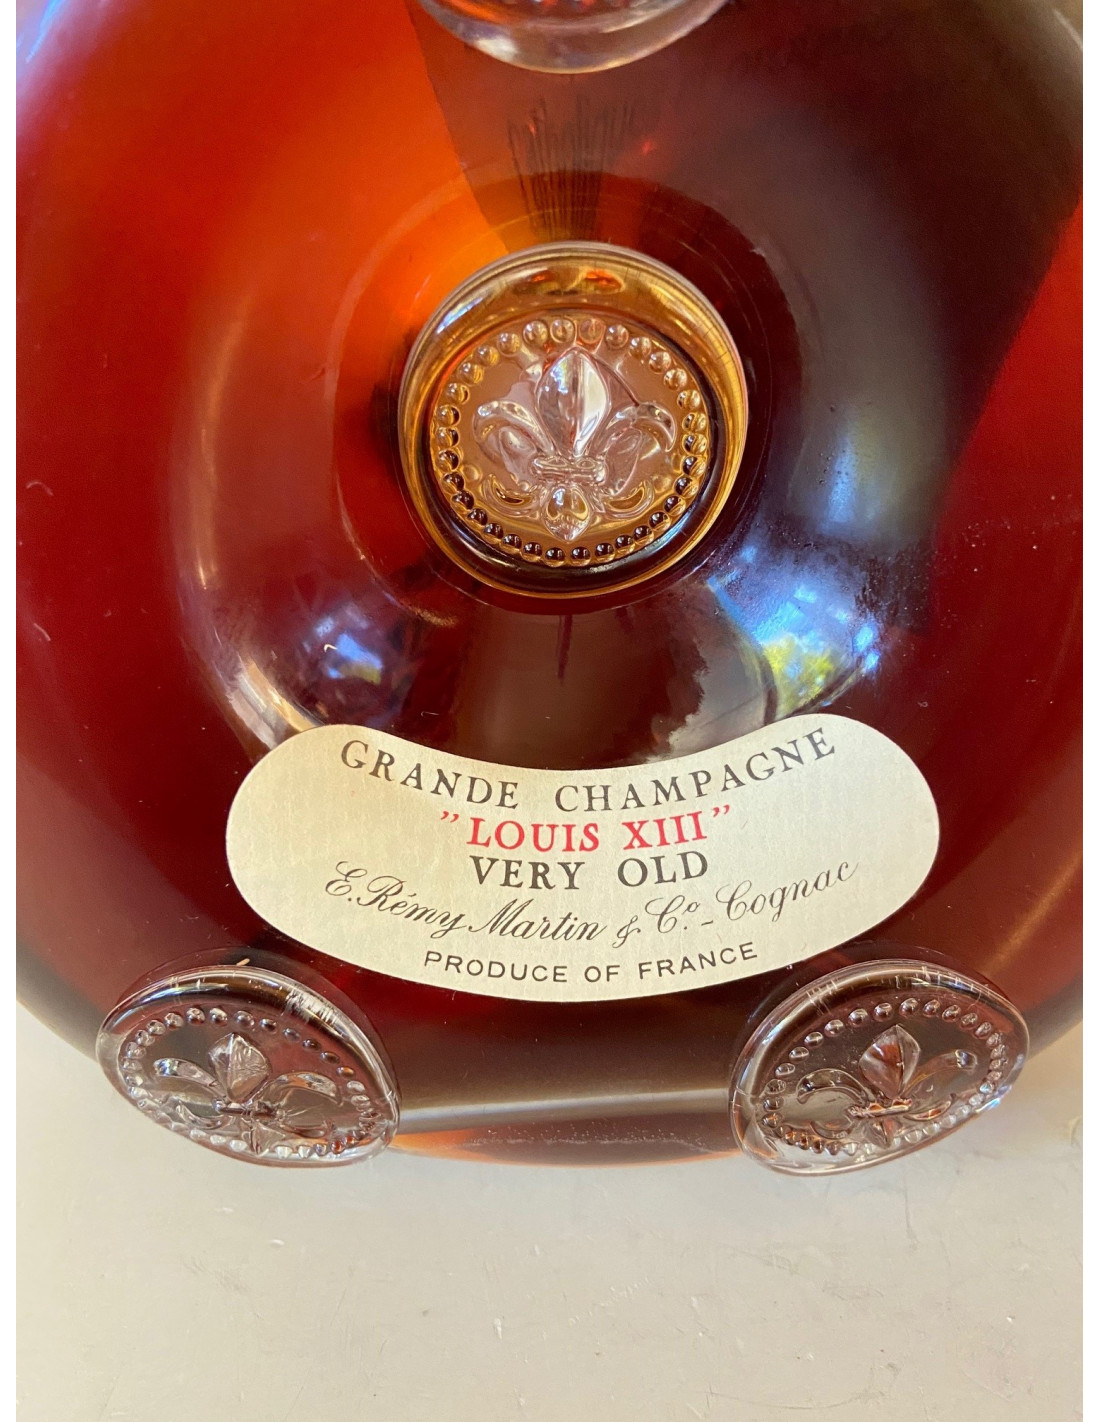 The Quest for A Legend: The Oldest Remy Martin Louis XIII